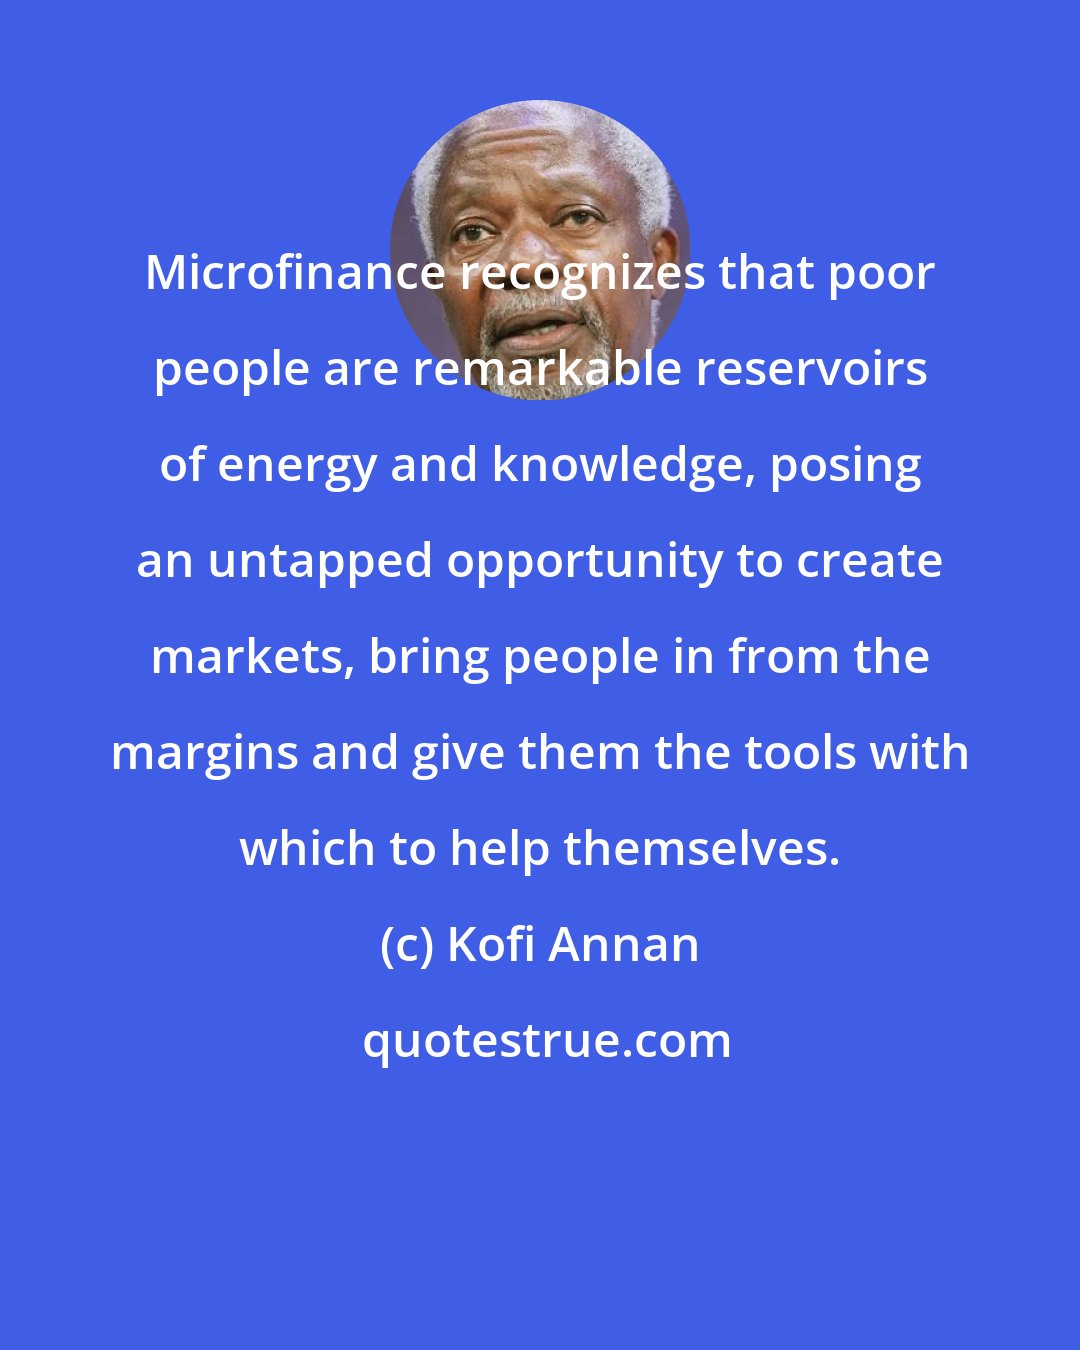 Kofi Annan: Microfinance recognizes that poor people are remarkable reservoirs of energy and knowledge, posing an untapped opportunity to create markets, bring people in from the margins and give them the tools with which to help themselves.